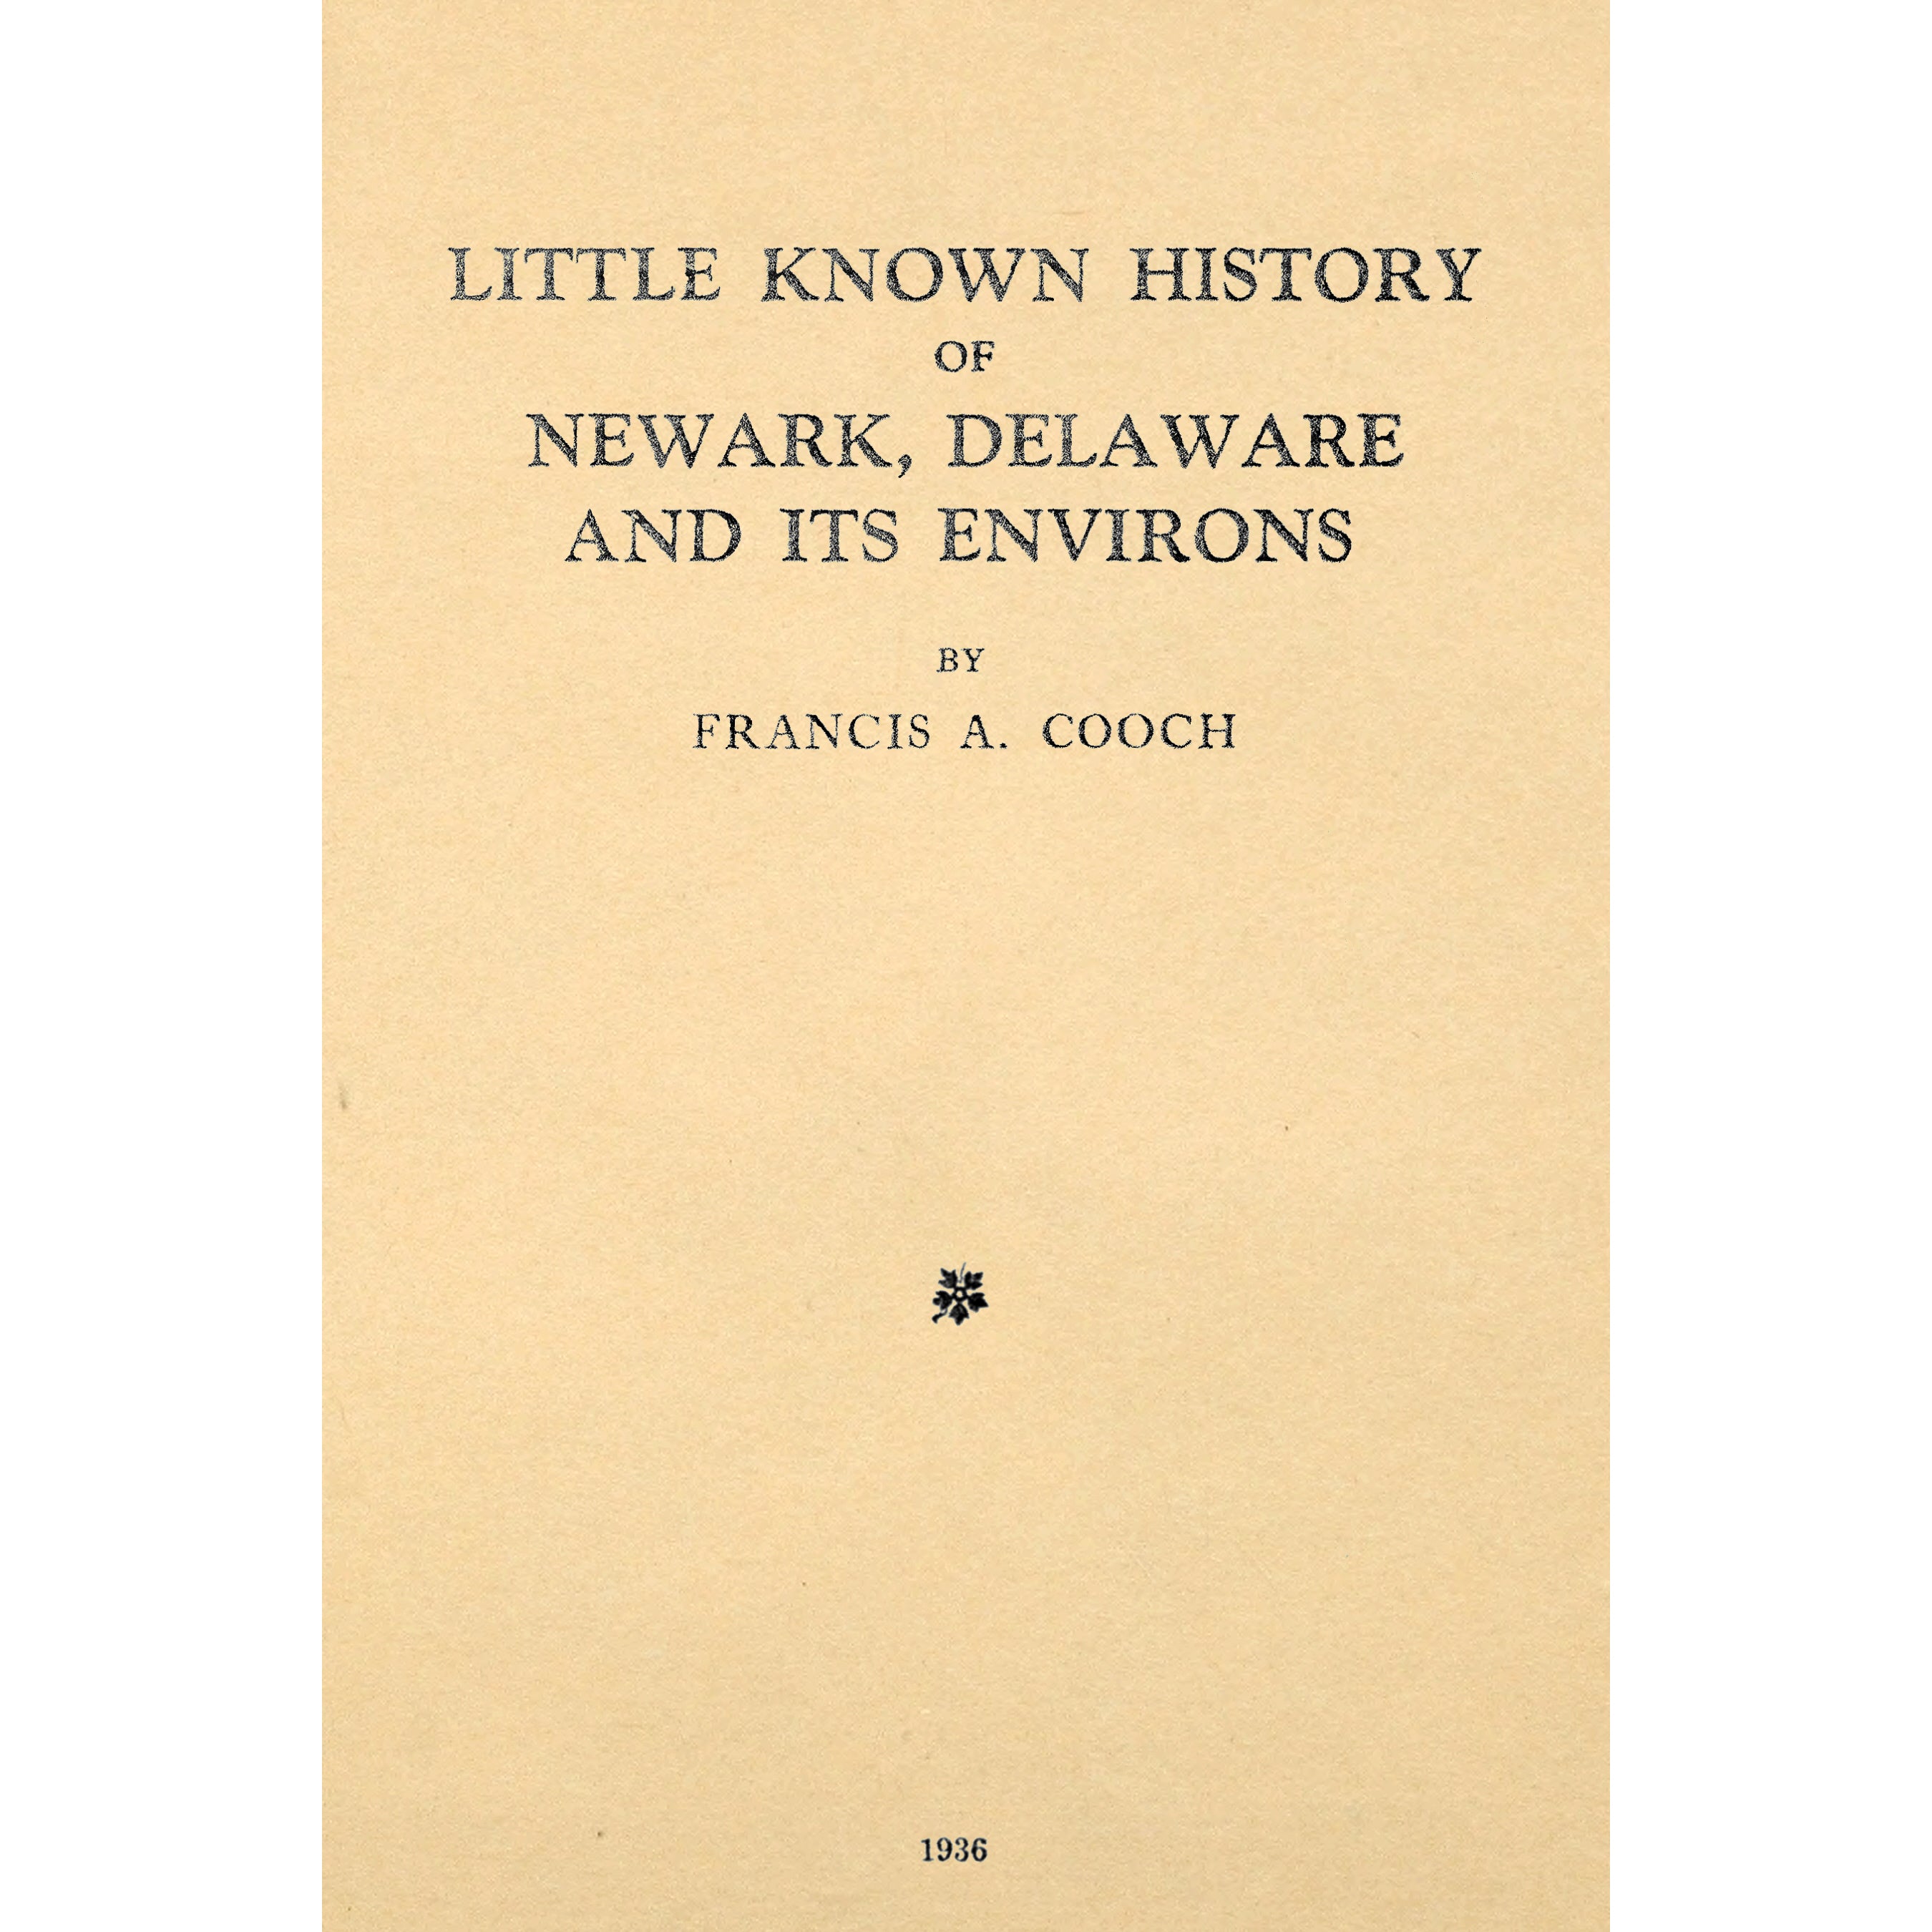 Little Known History of Newark, Delaware and its Environs